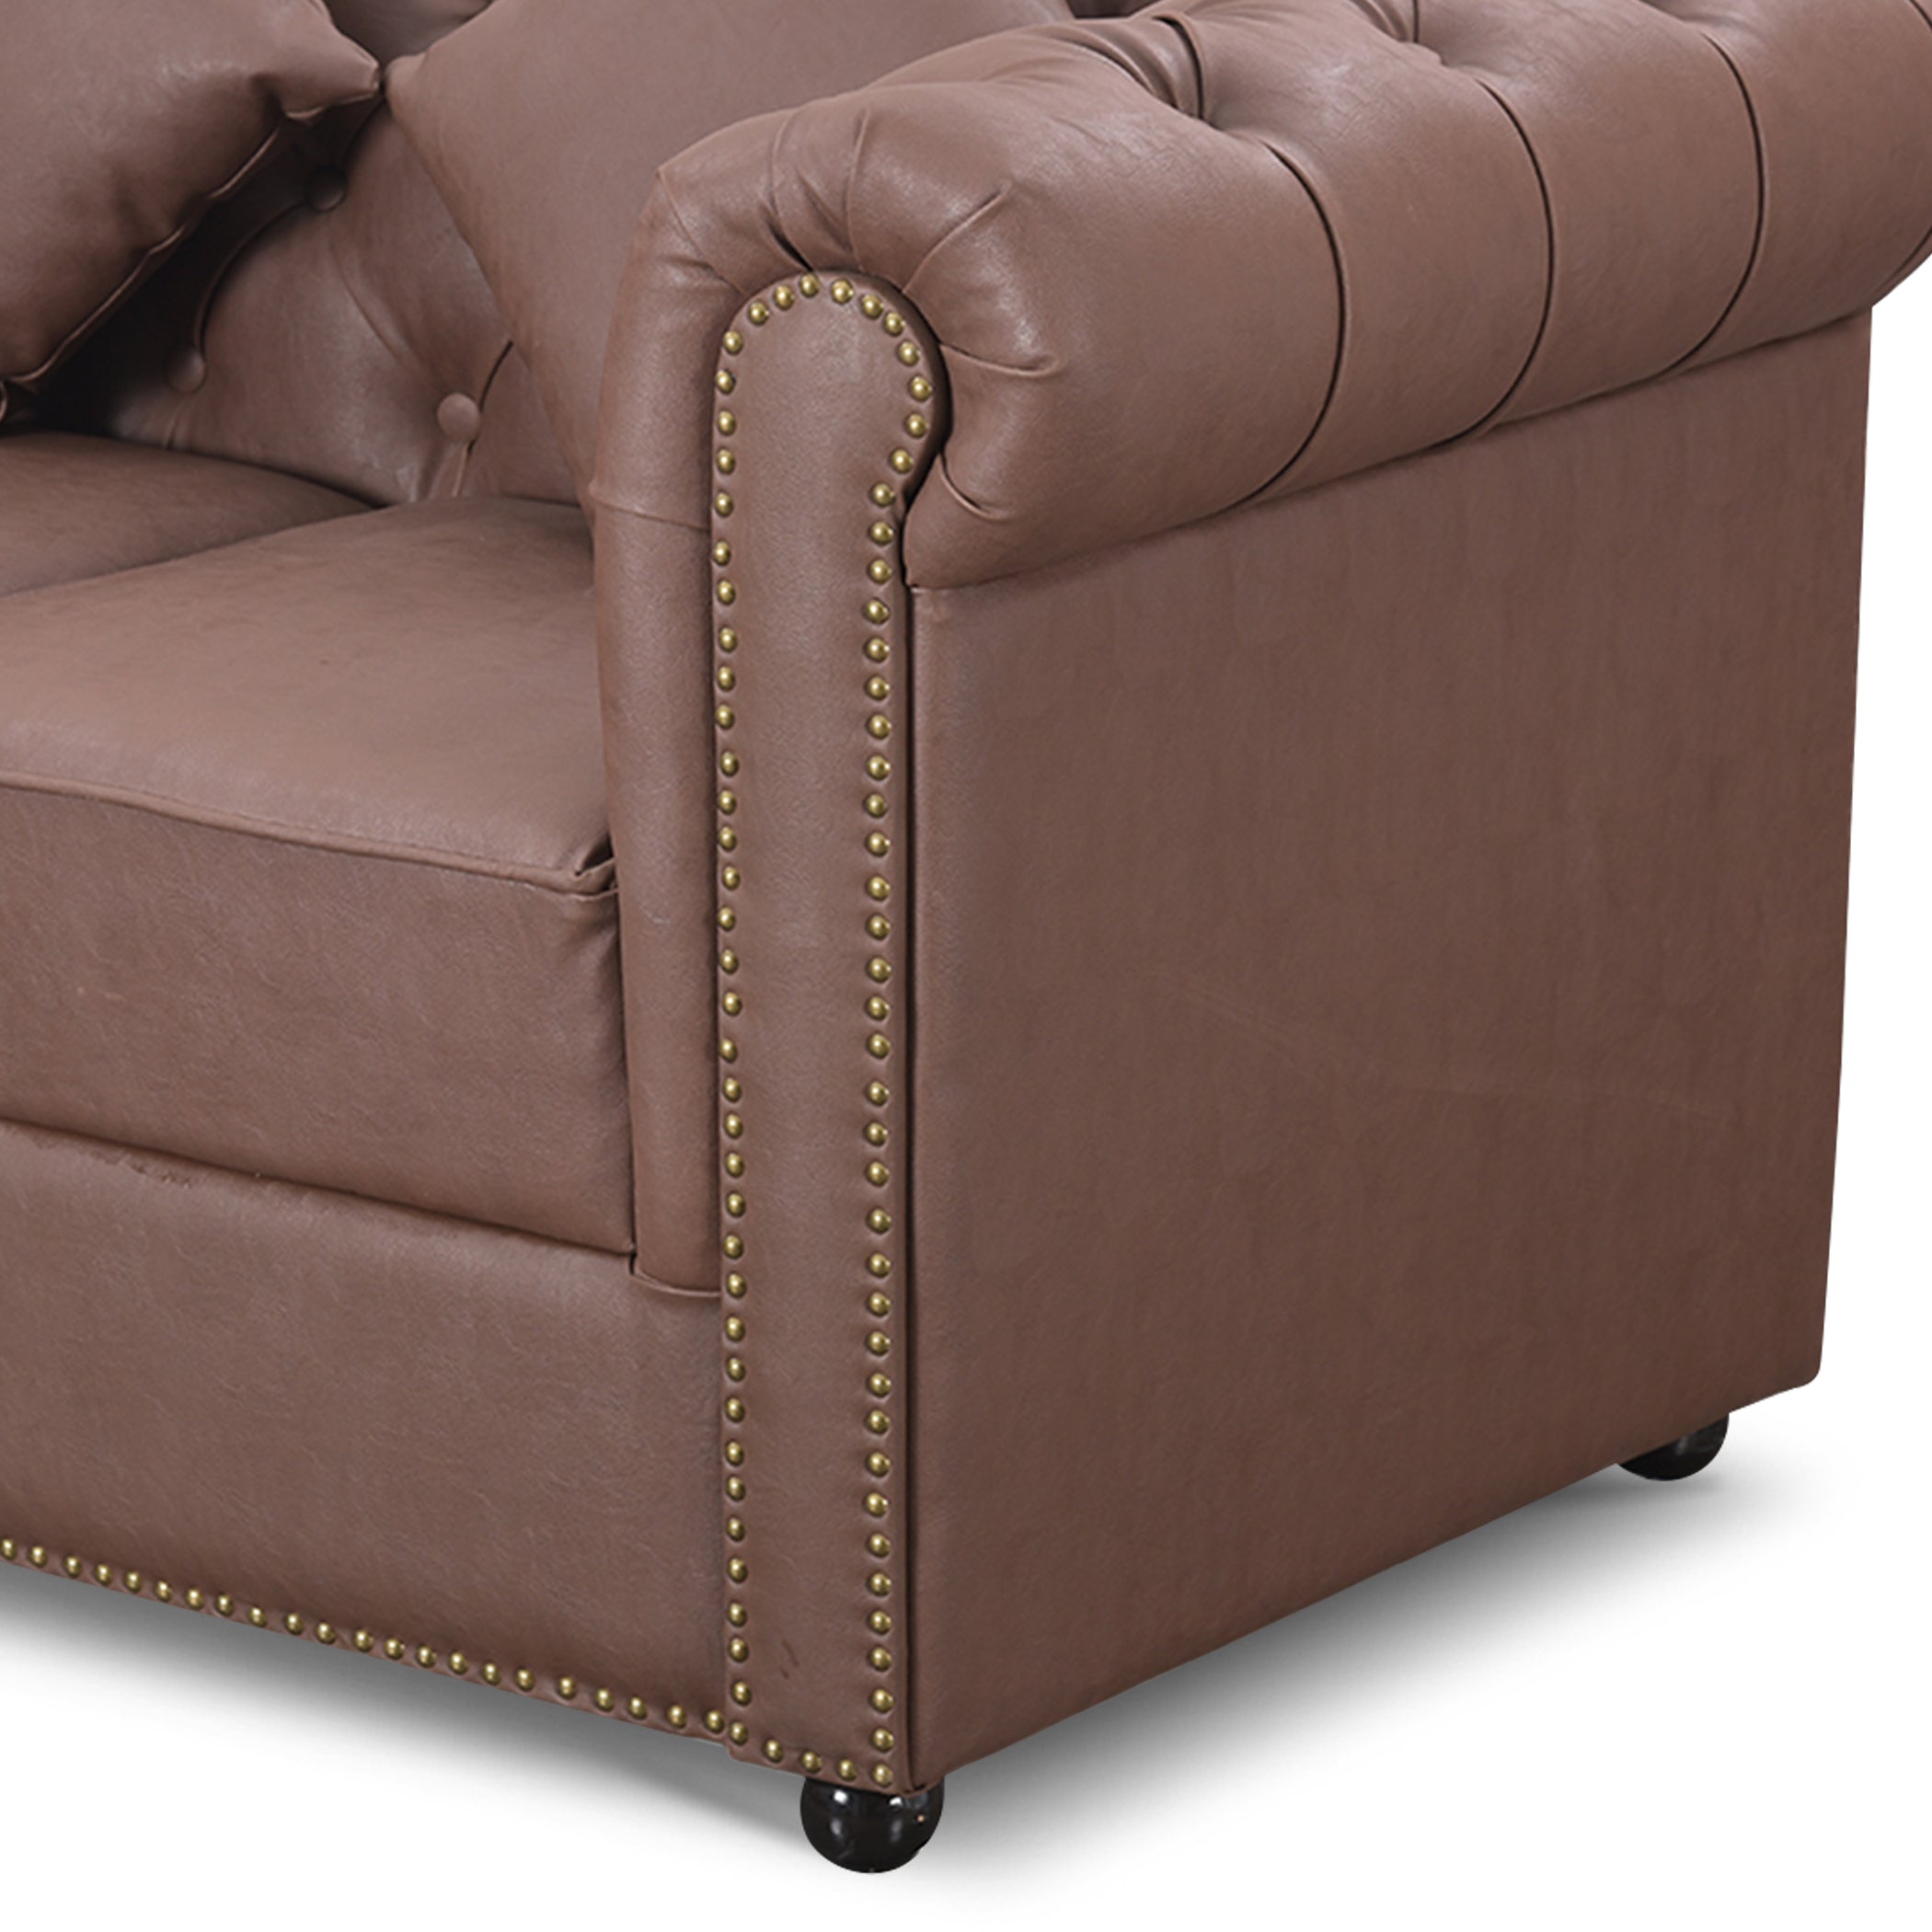 Chester Brown 2S Sofa by Zorin Zorin